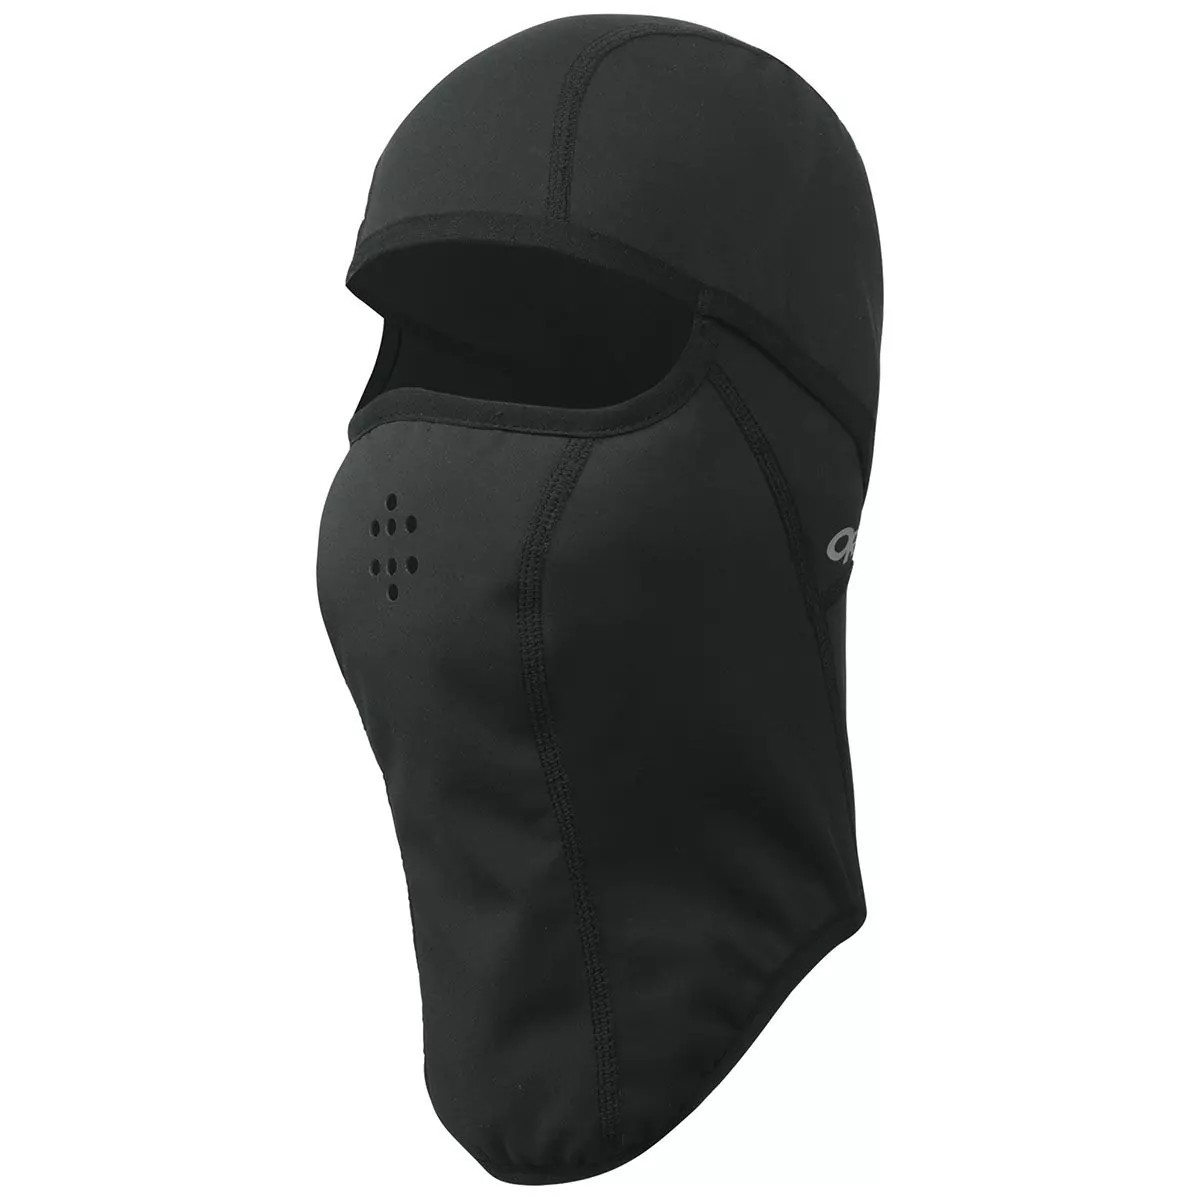 Outdoor Research Helmetclava :: Head gear :: Clothing Accessories ...